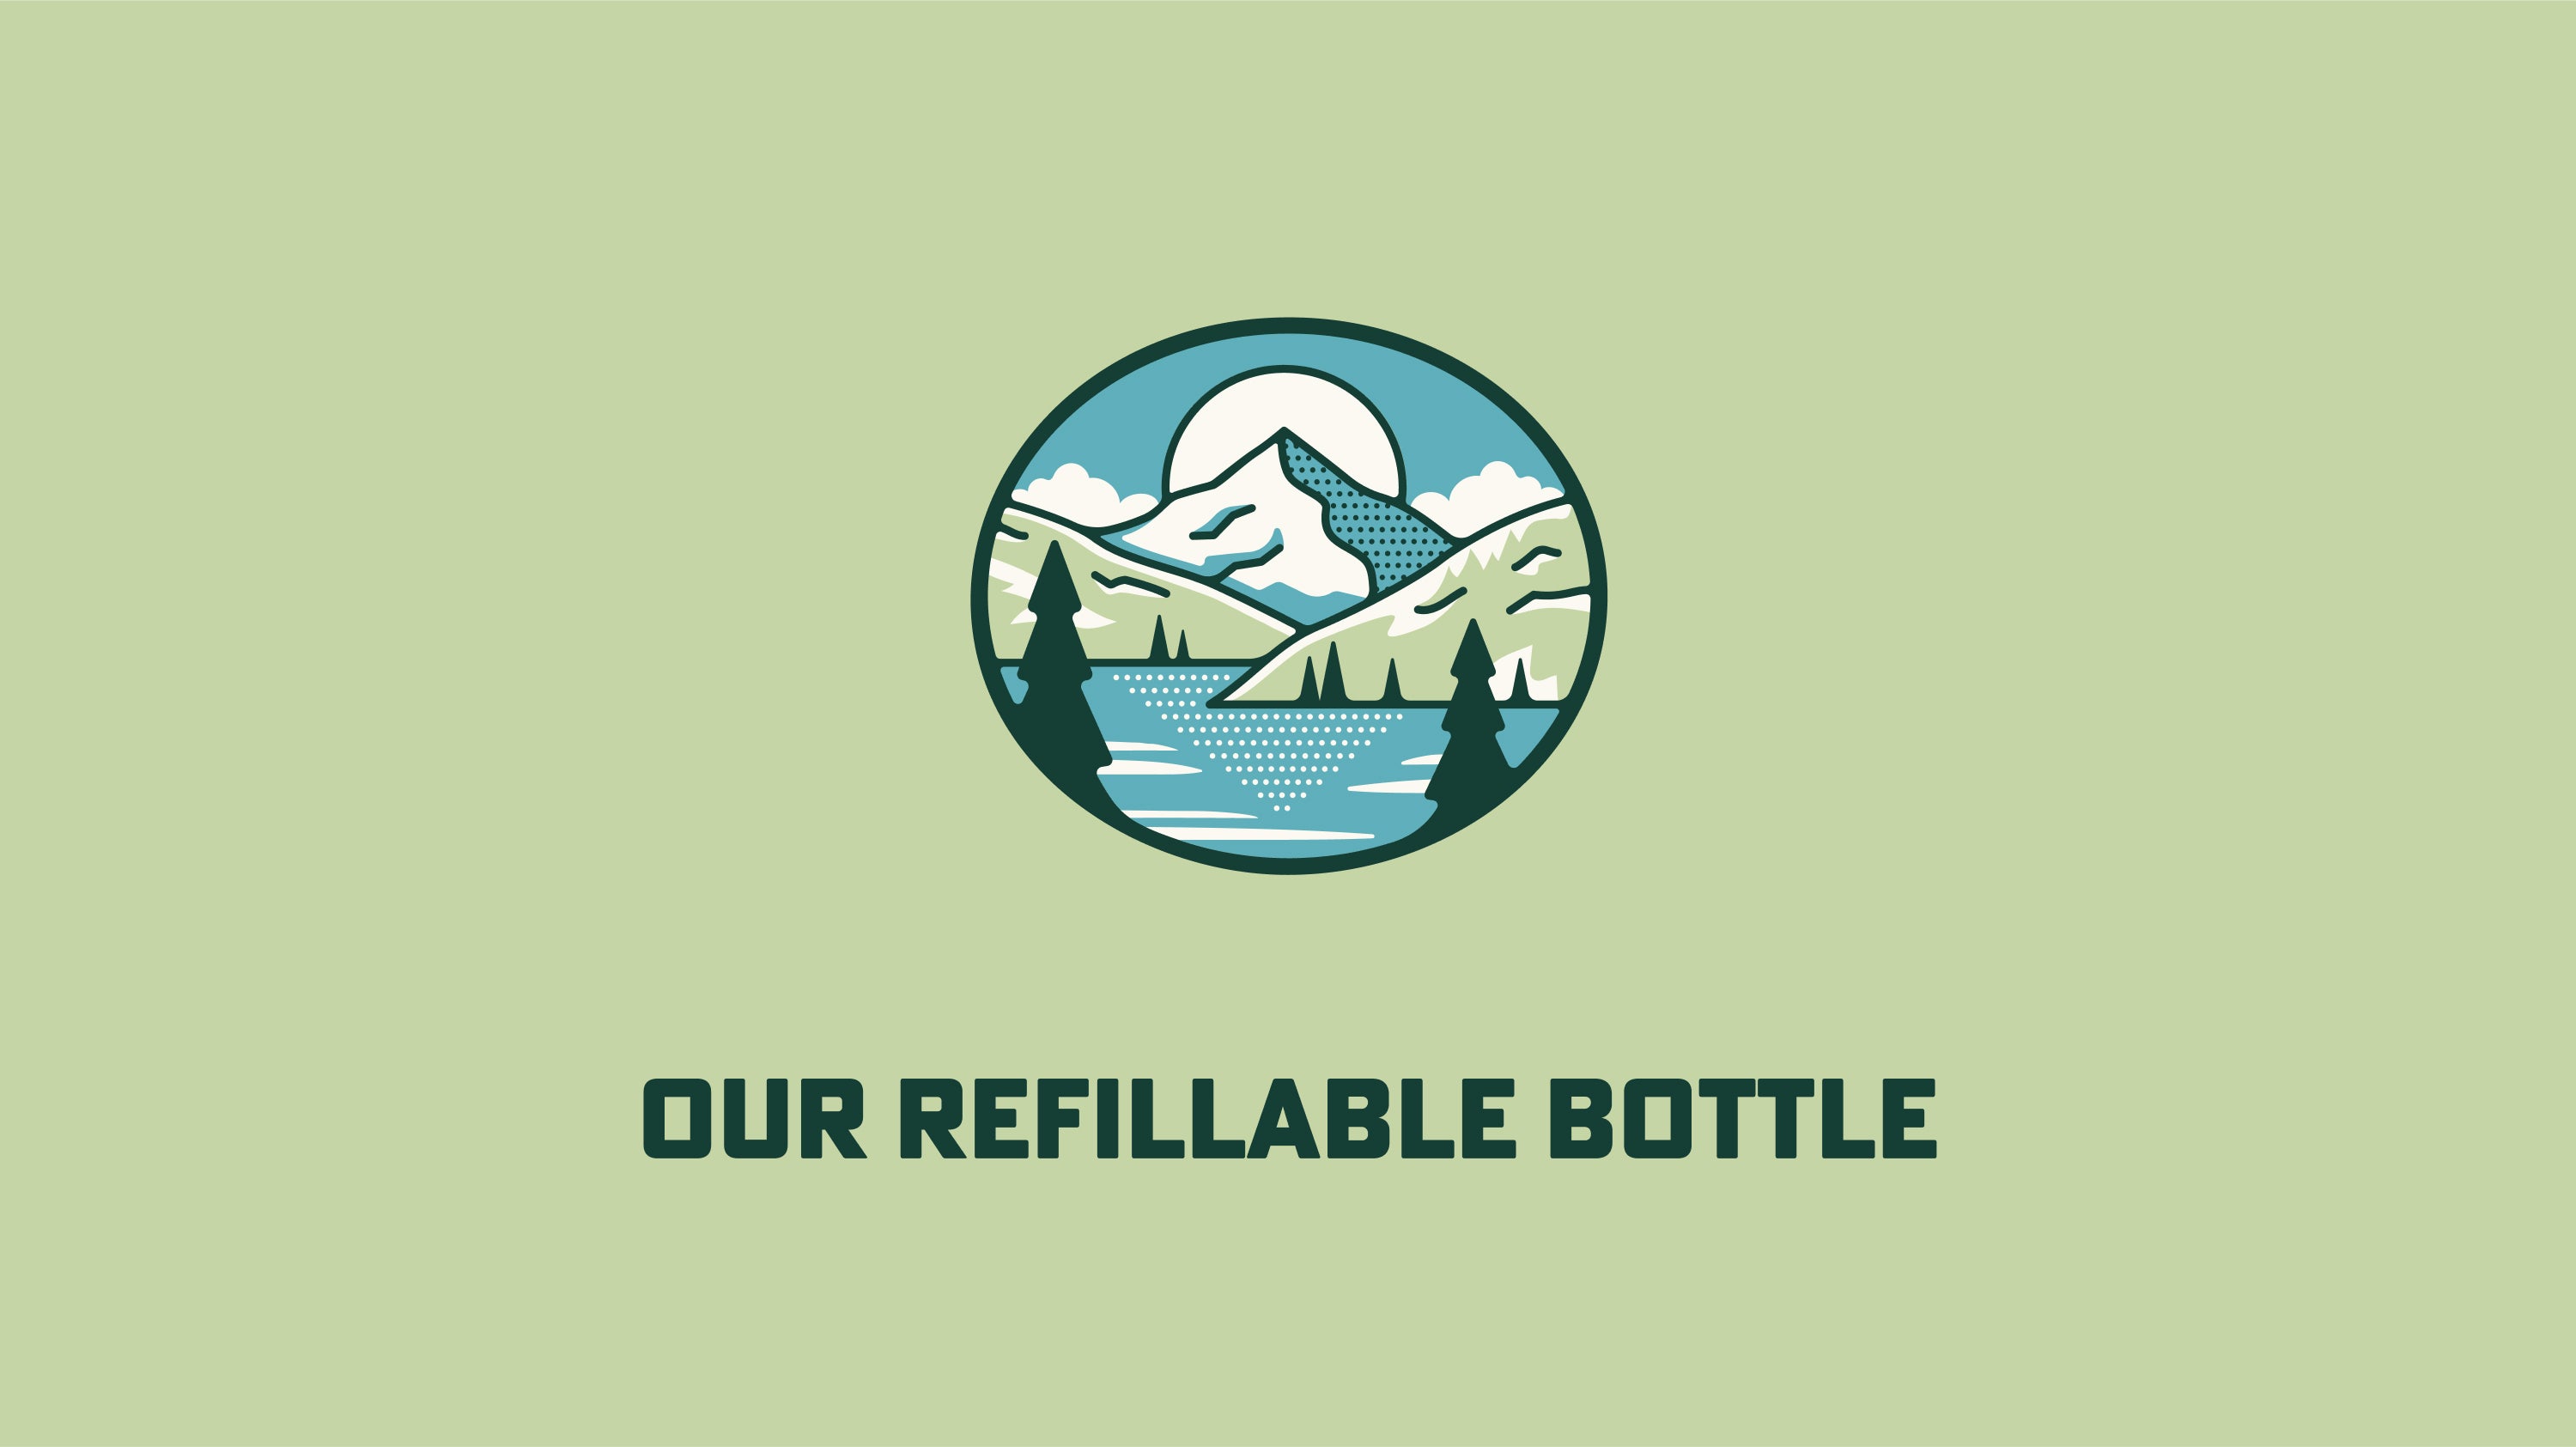 Load video: Our Refillable Bottle